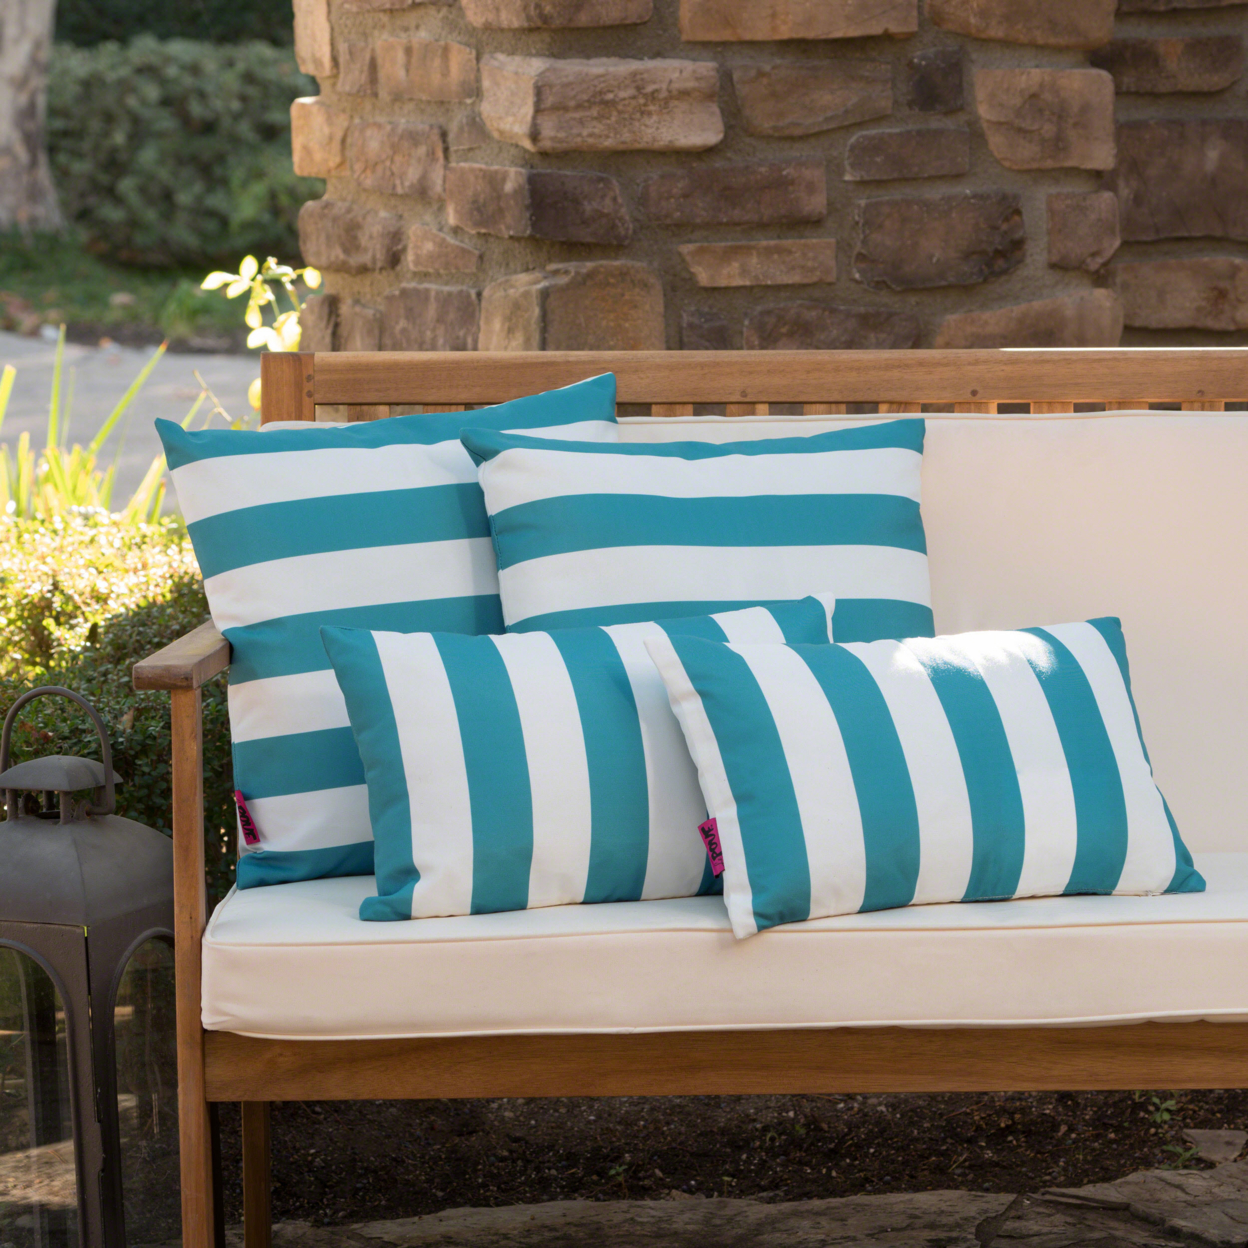 La Jolla Outdoor Water Resistant Square And Rectangular Throw Pillows - Set Of 4 - Green/White